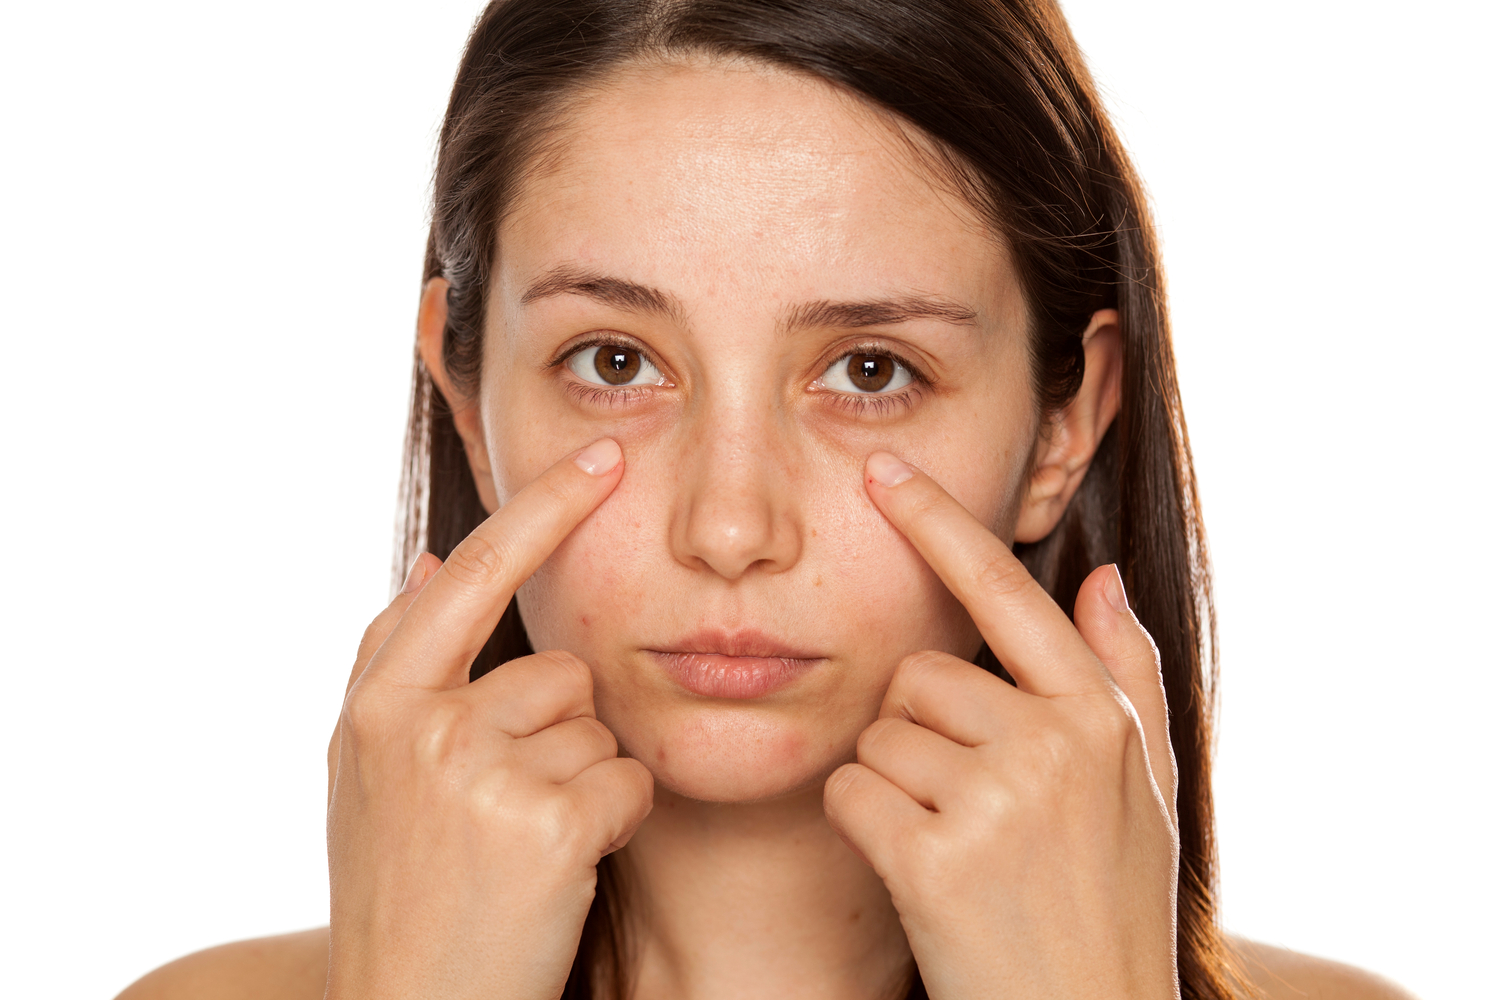 How To Get Rid of Those Dark Circles Under Your Eyes